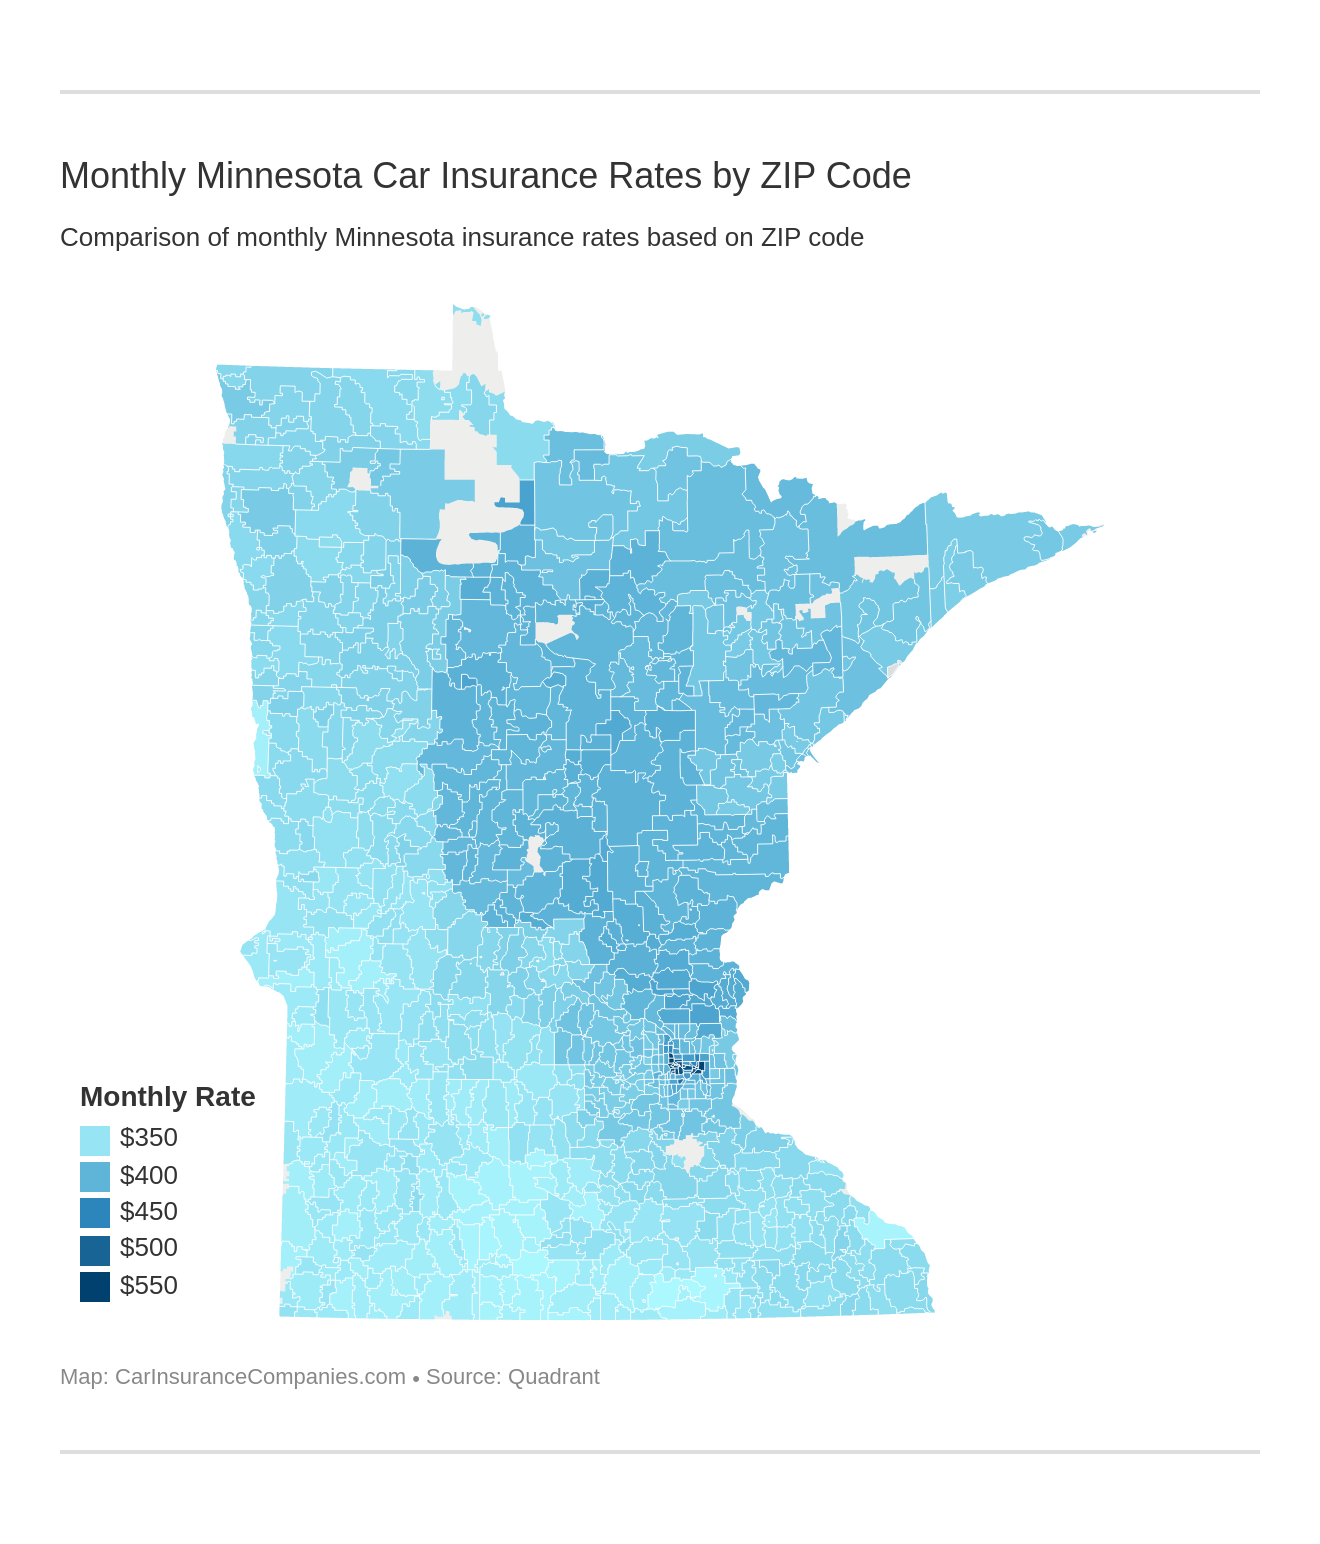 Monthly Minnesota Car Insurance Rates by ZIP Code